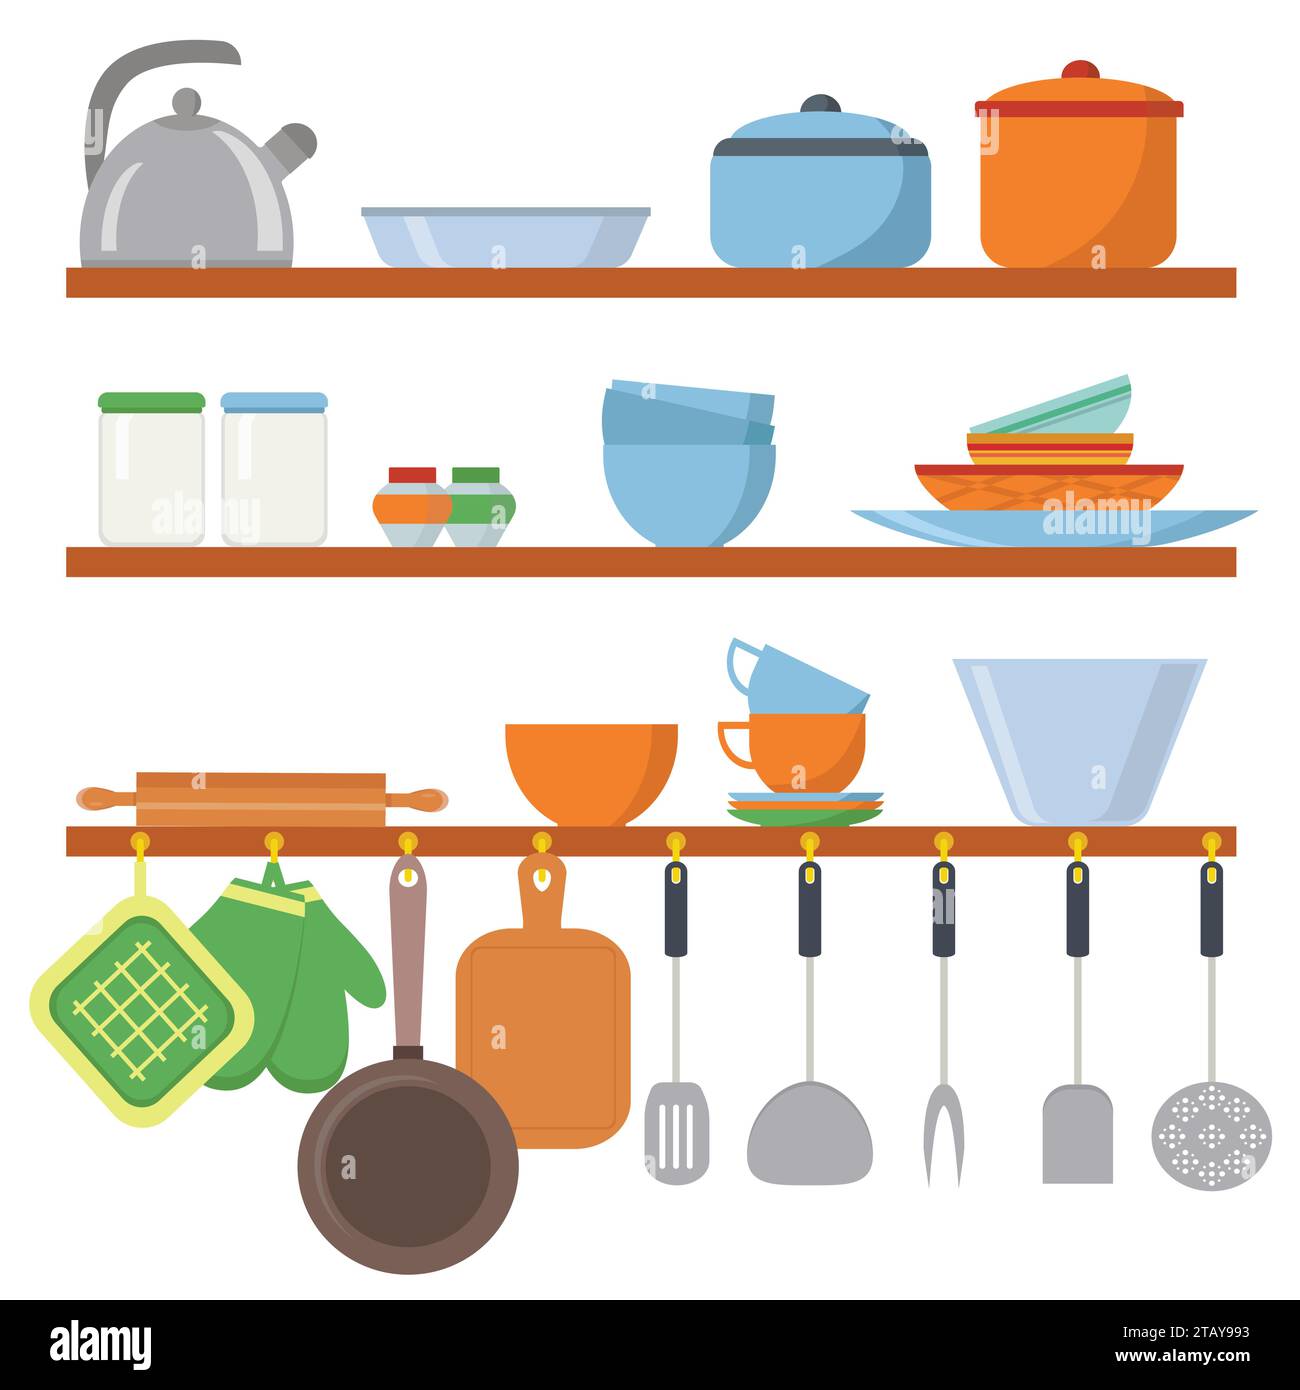 Kitchen equipments and utensils big set icons on shelf isolated on white background. Cooking tools objects collection. Kitchenware in flat style Stock Vector